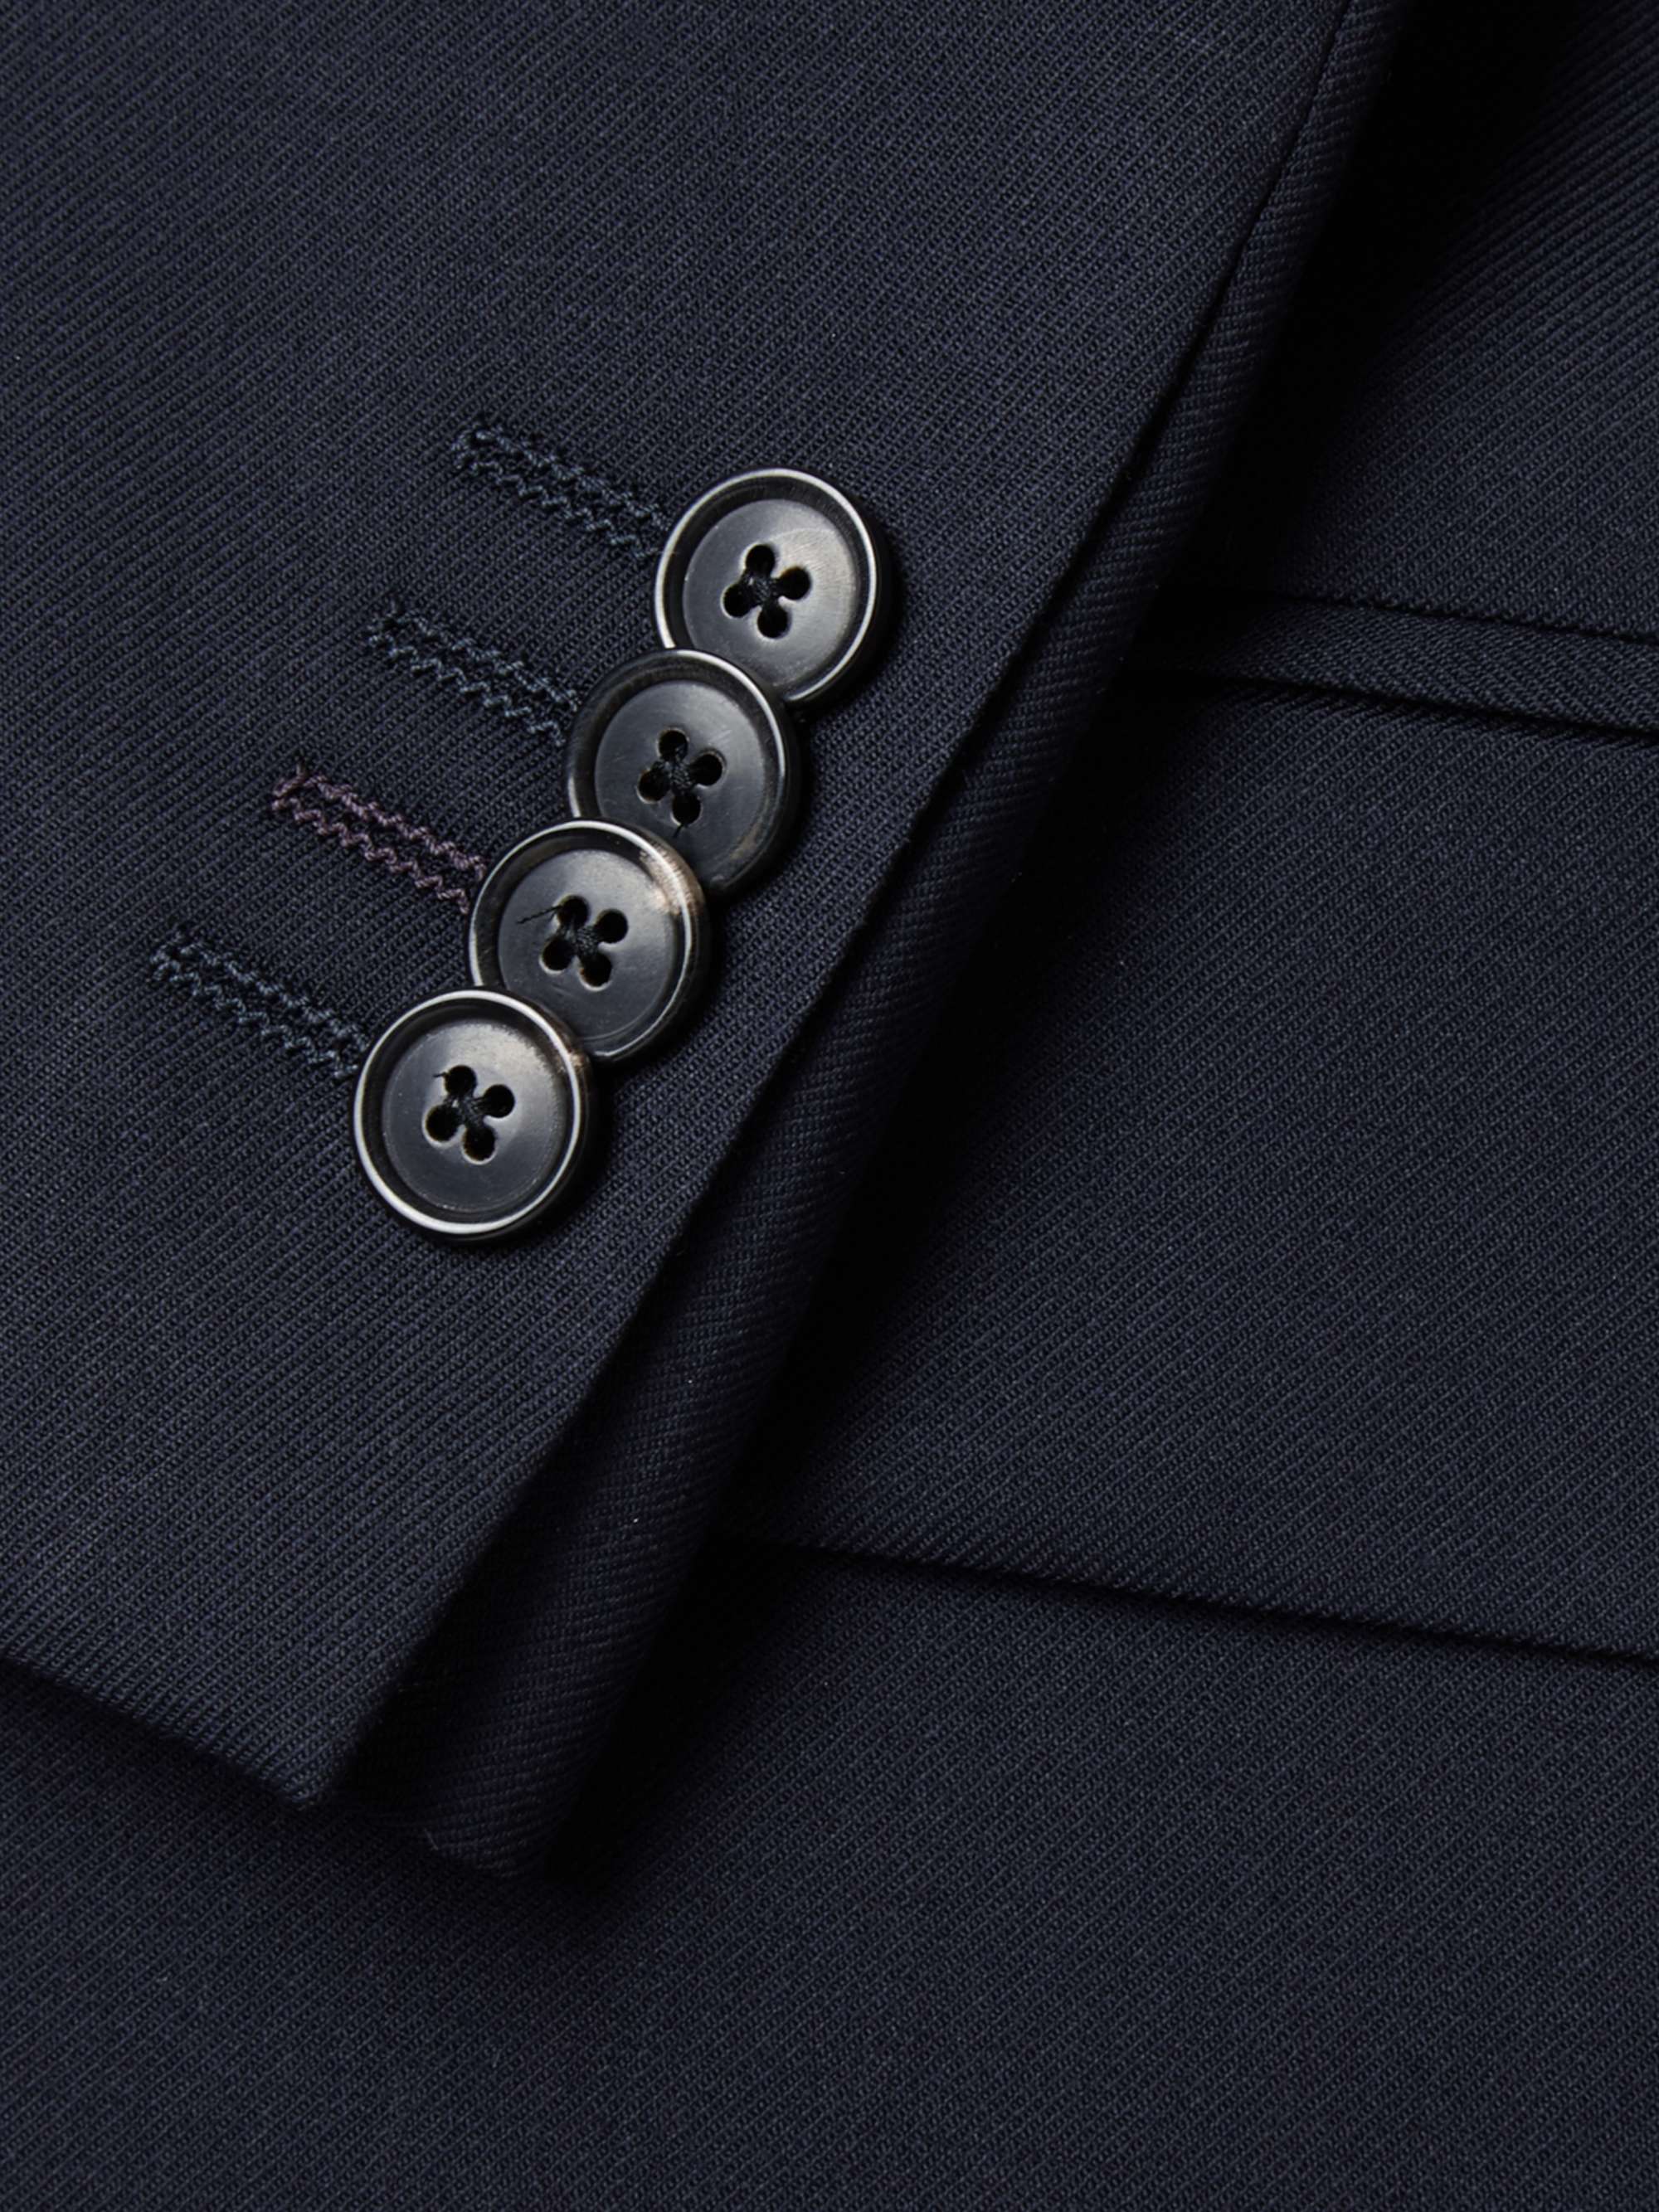 PAUL SMITH Navy A Suit To Travel In Soho Slim-Fit Wool Suit | MR PORTER